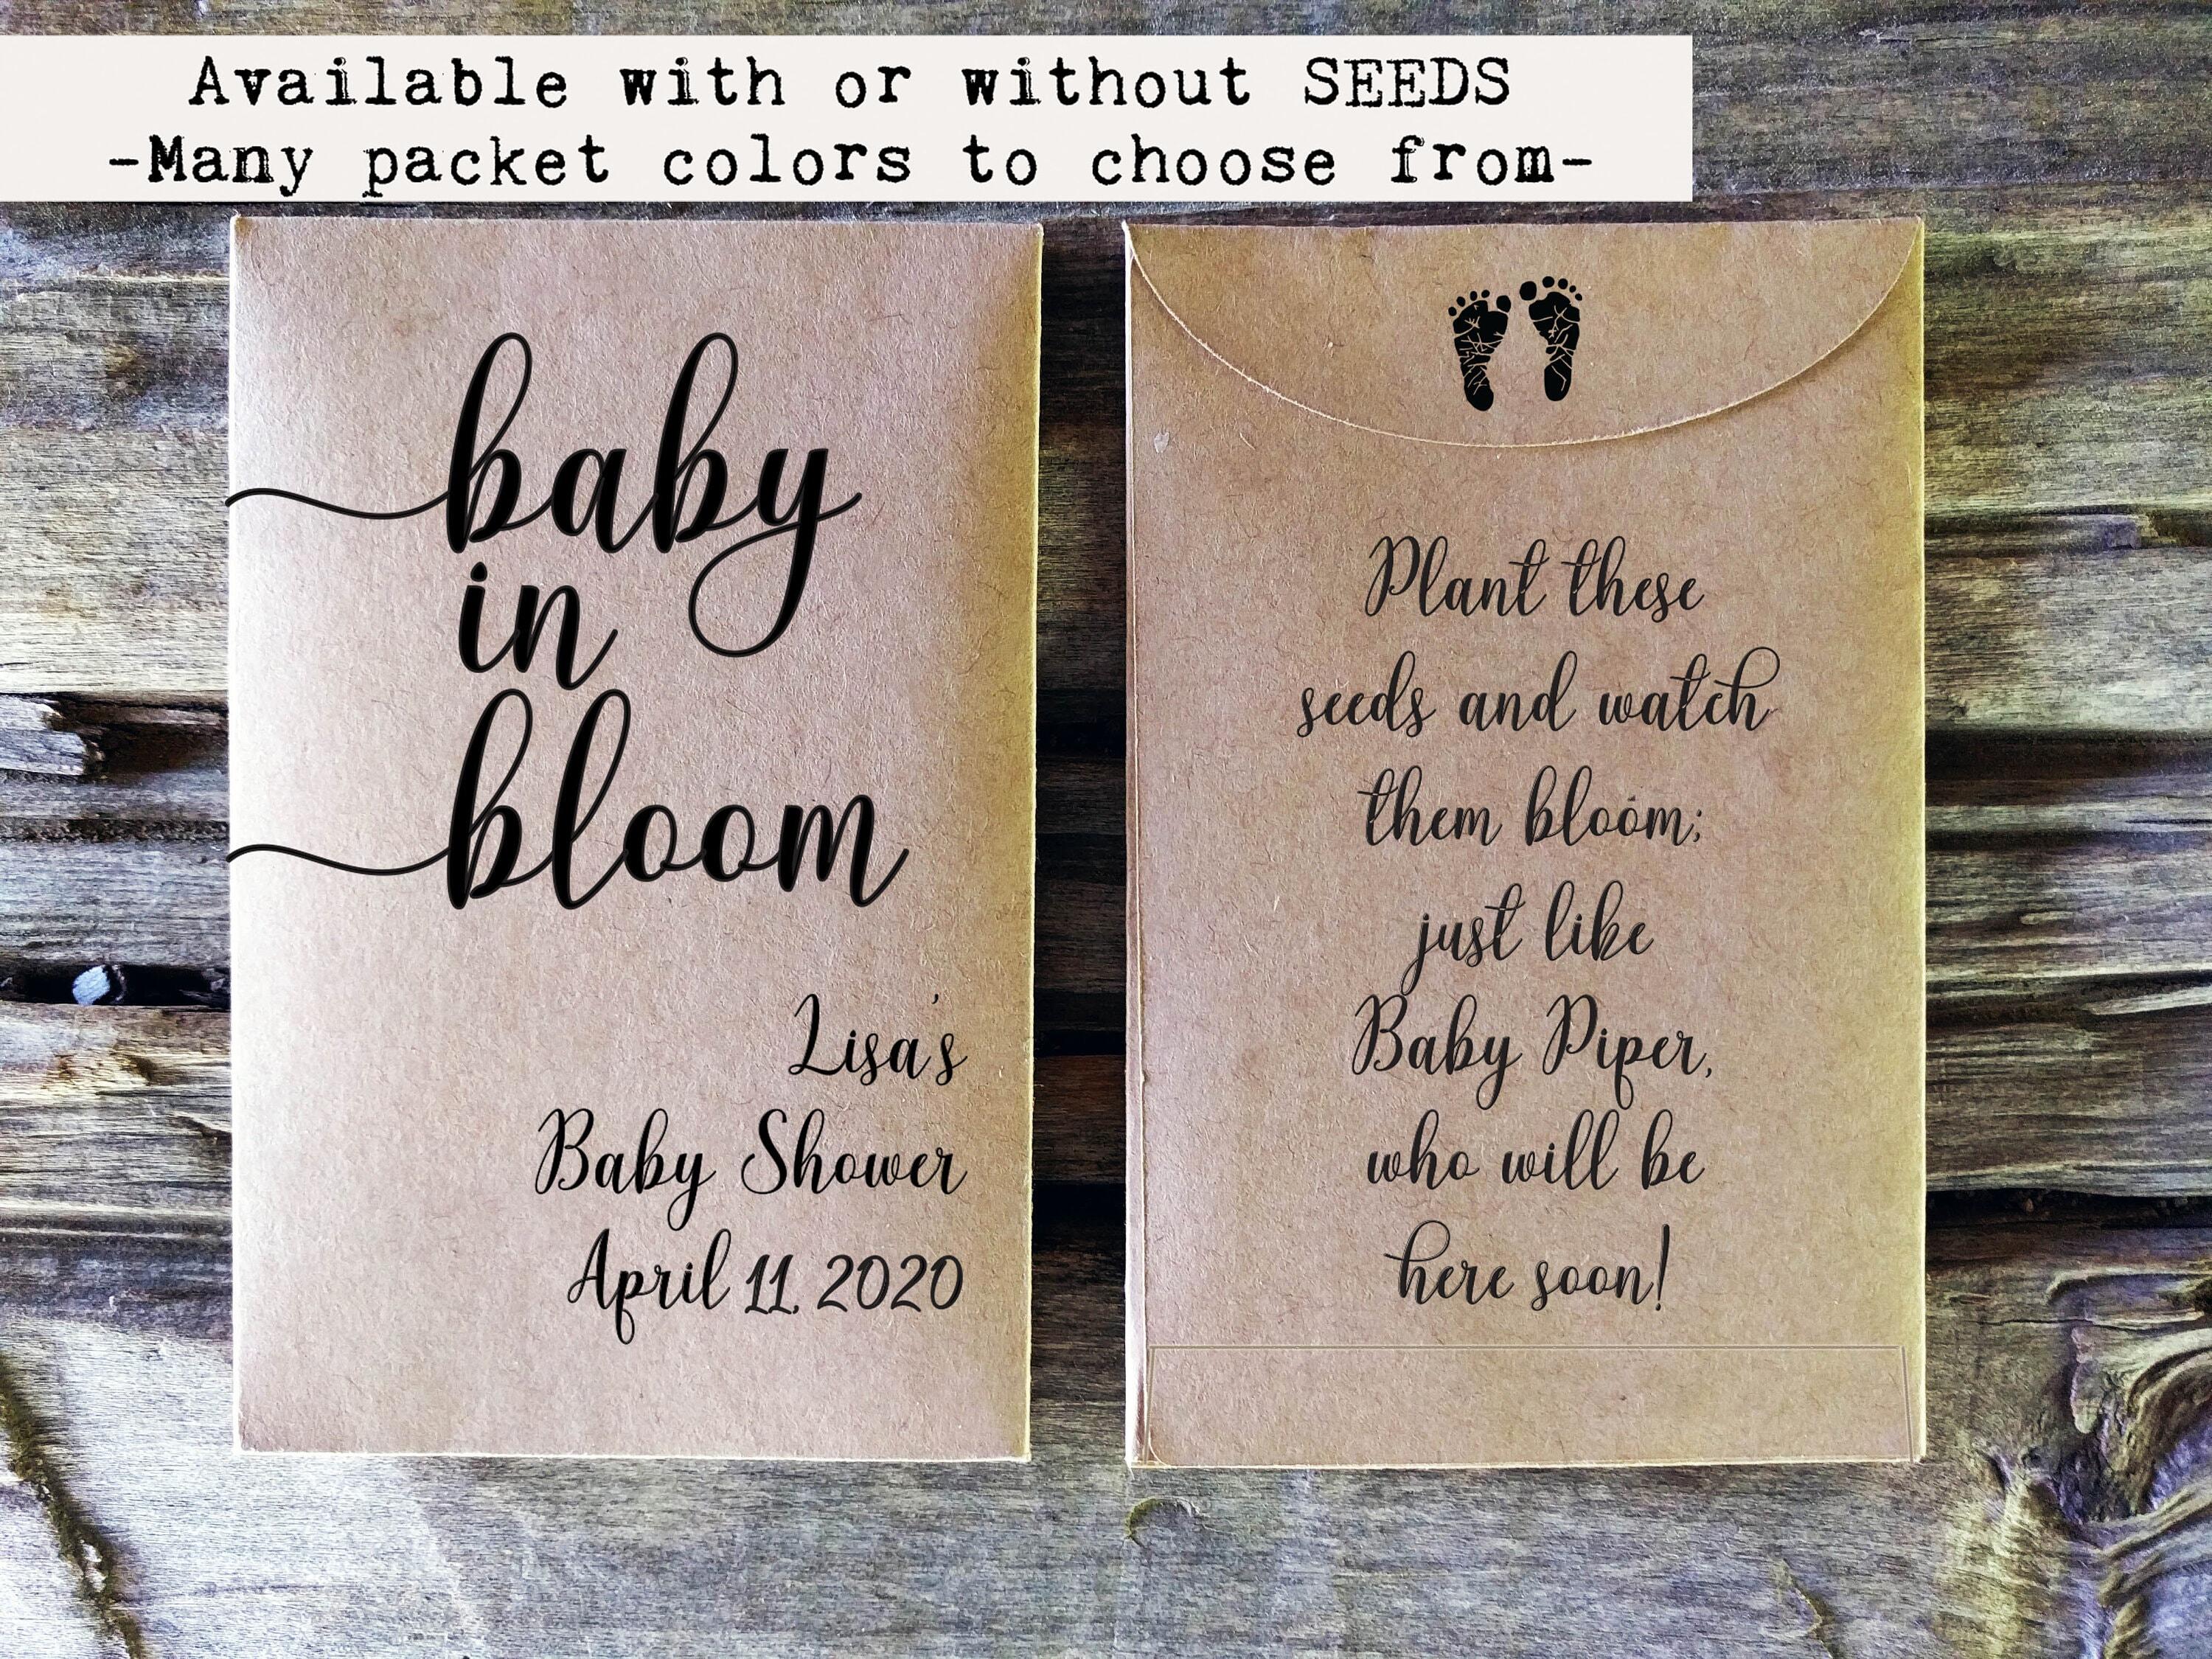 Baby Shower Seed packet favor. Rustic baby shower. Rustic Shower Favor.  Custom seed packets. Personalized shower favor. Baby in Bloom